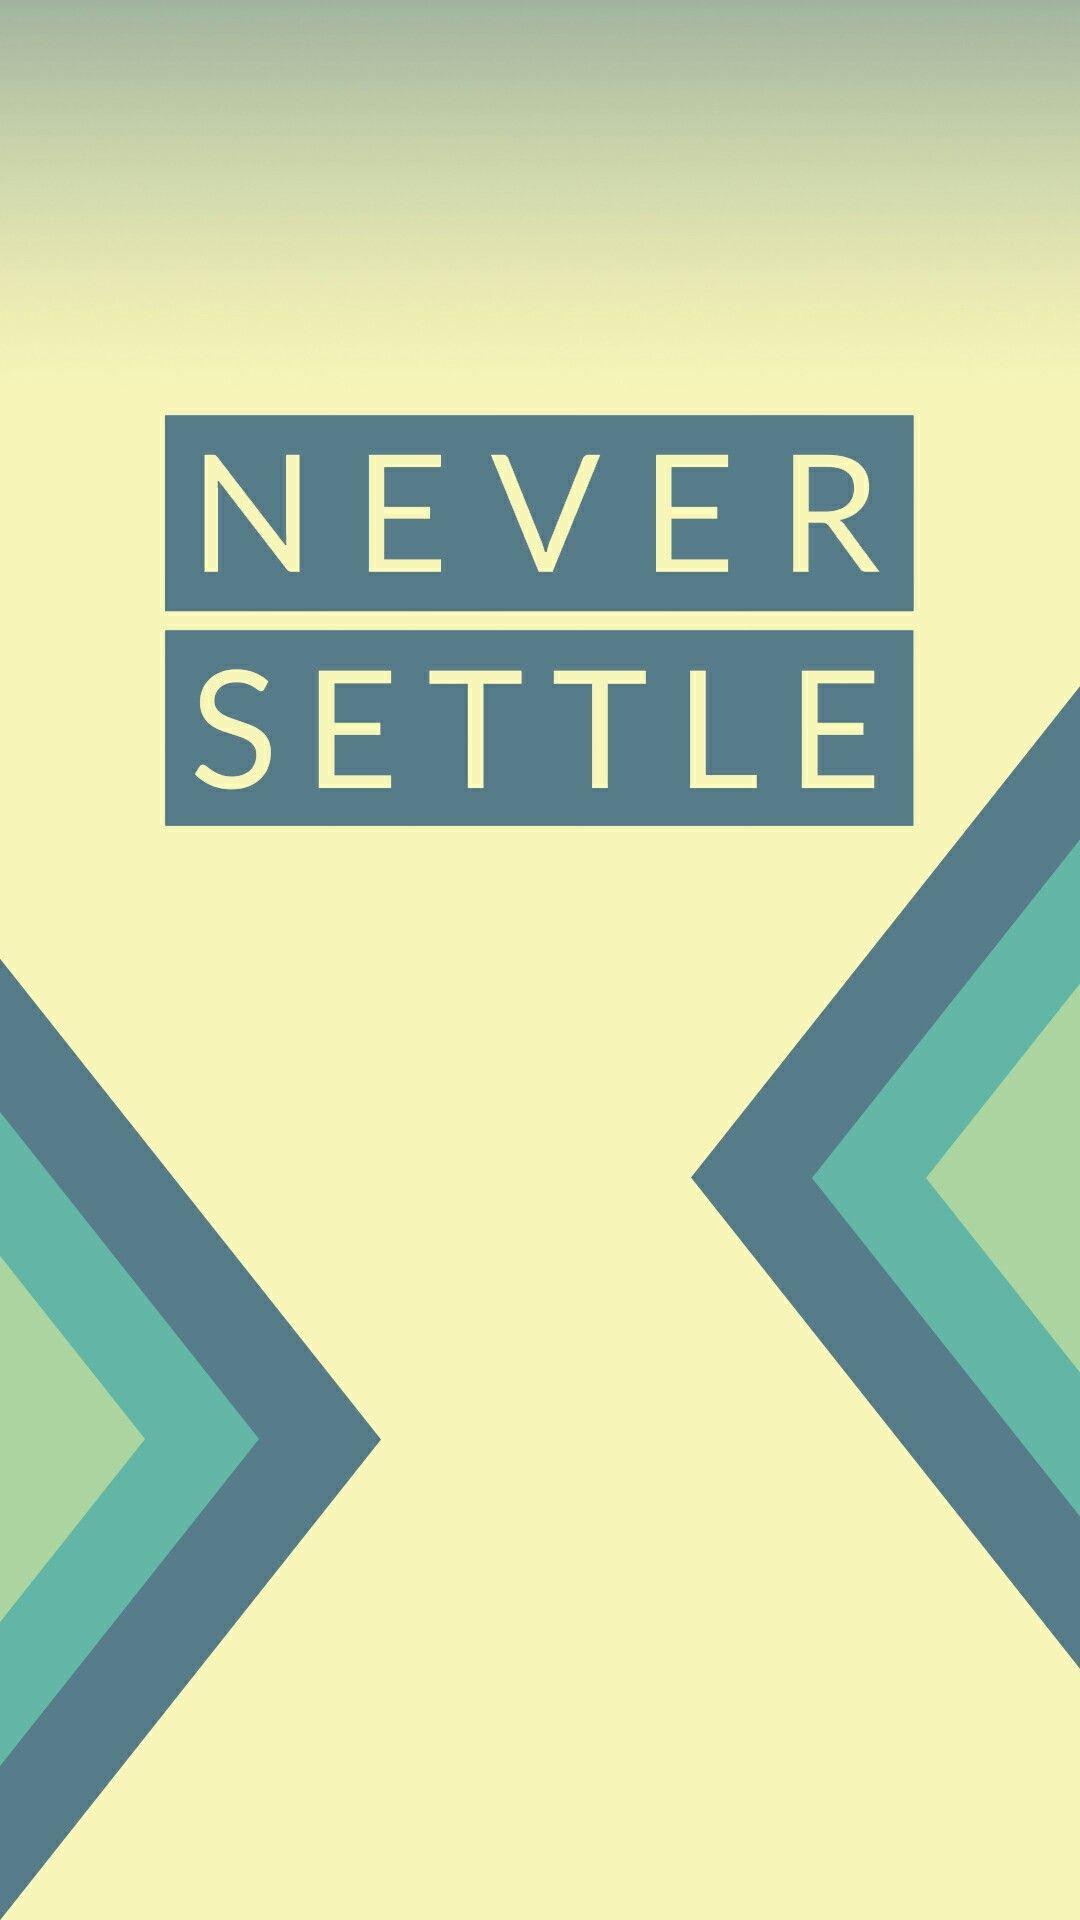 Download OnePlus themed Never Settle wallpaper in midnight black